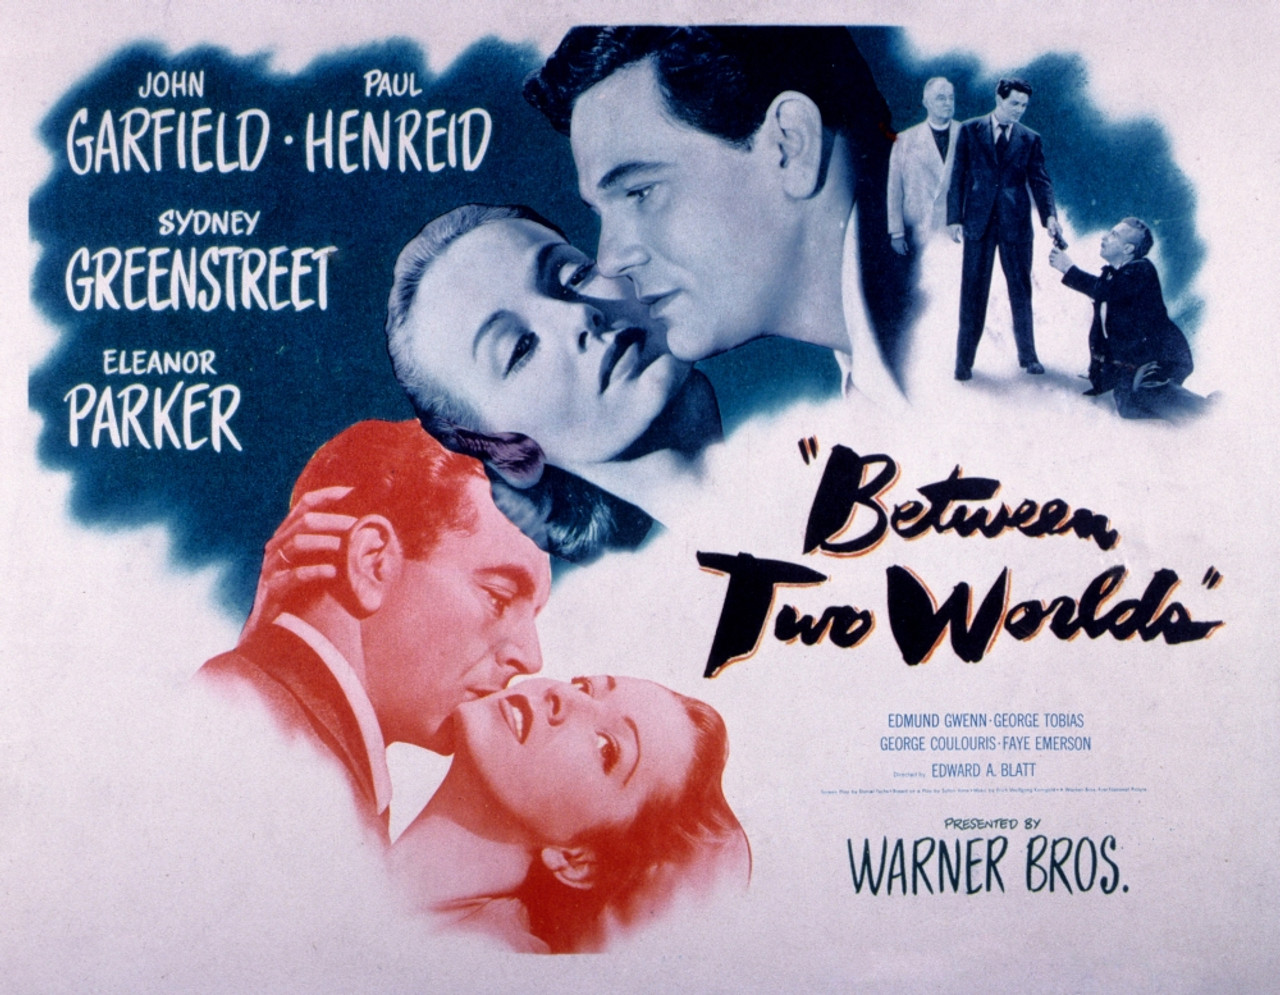 Film poster for "Between Two Worlds"